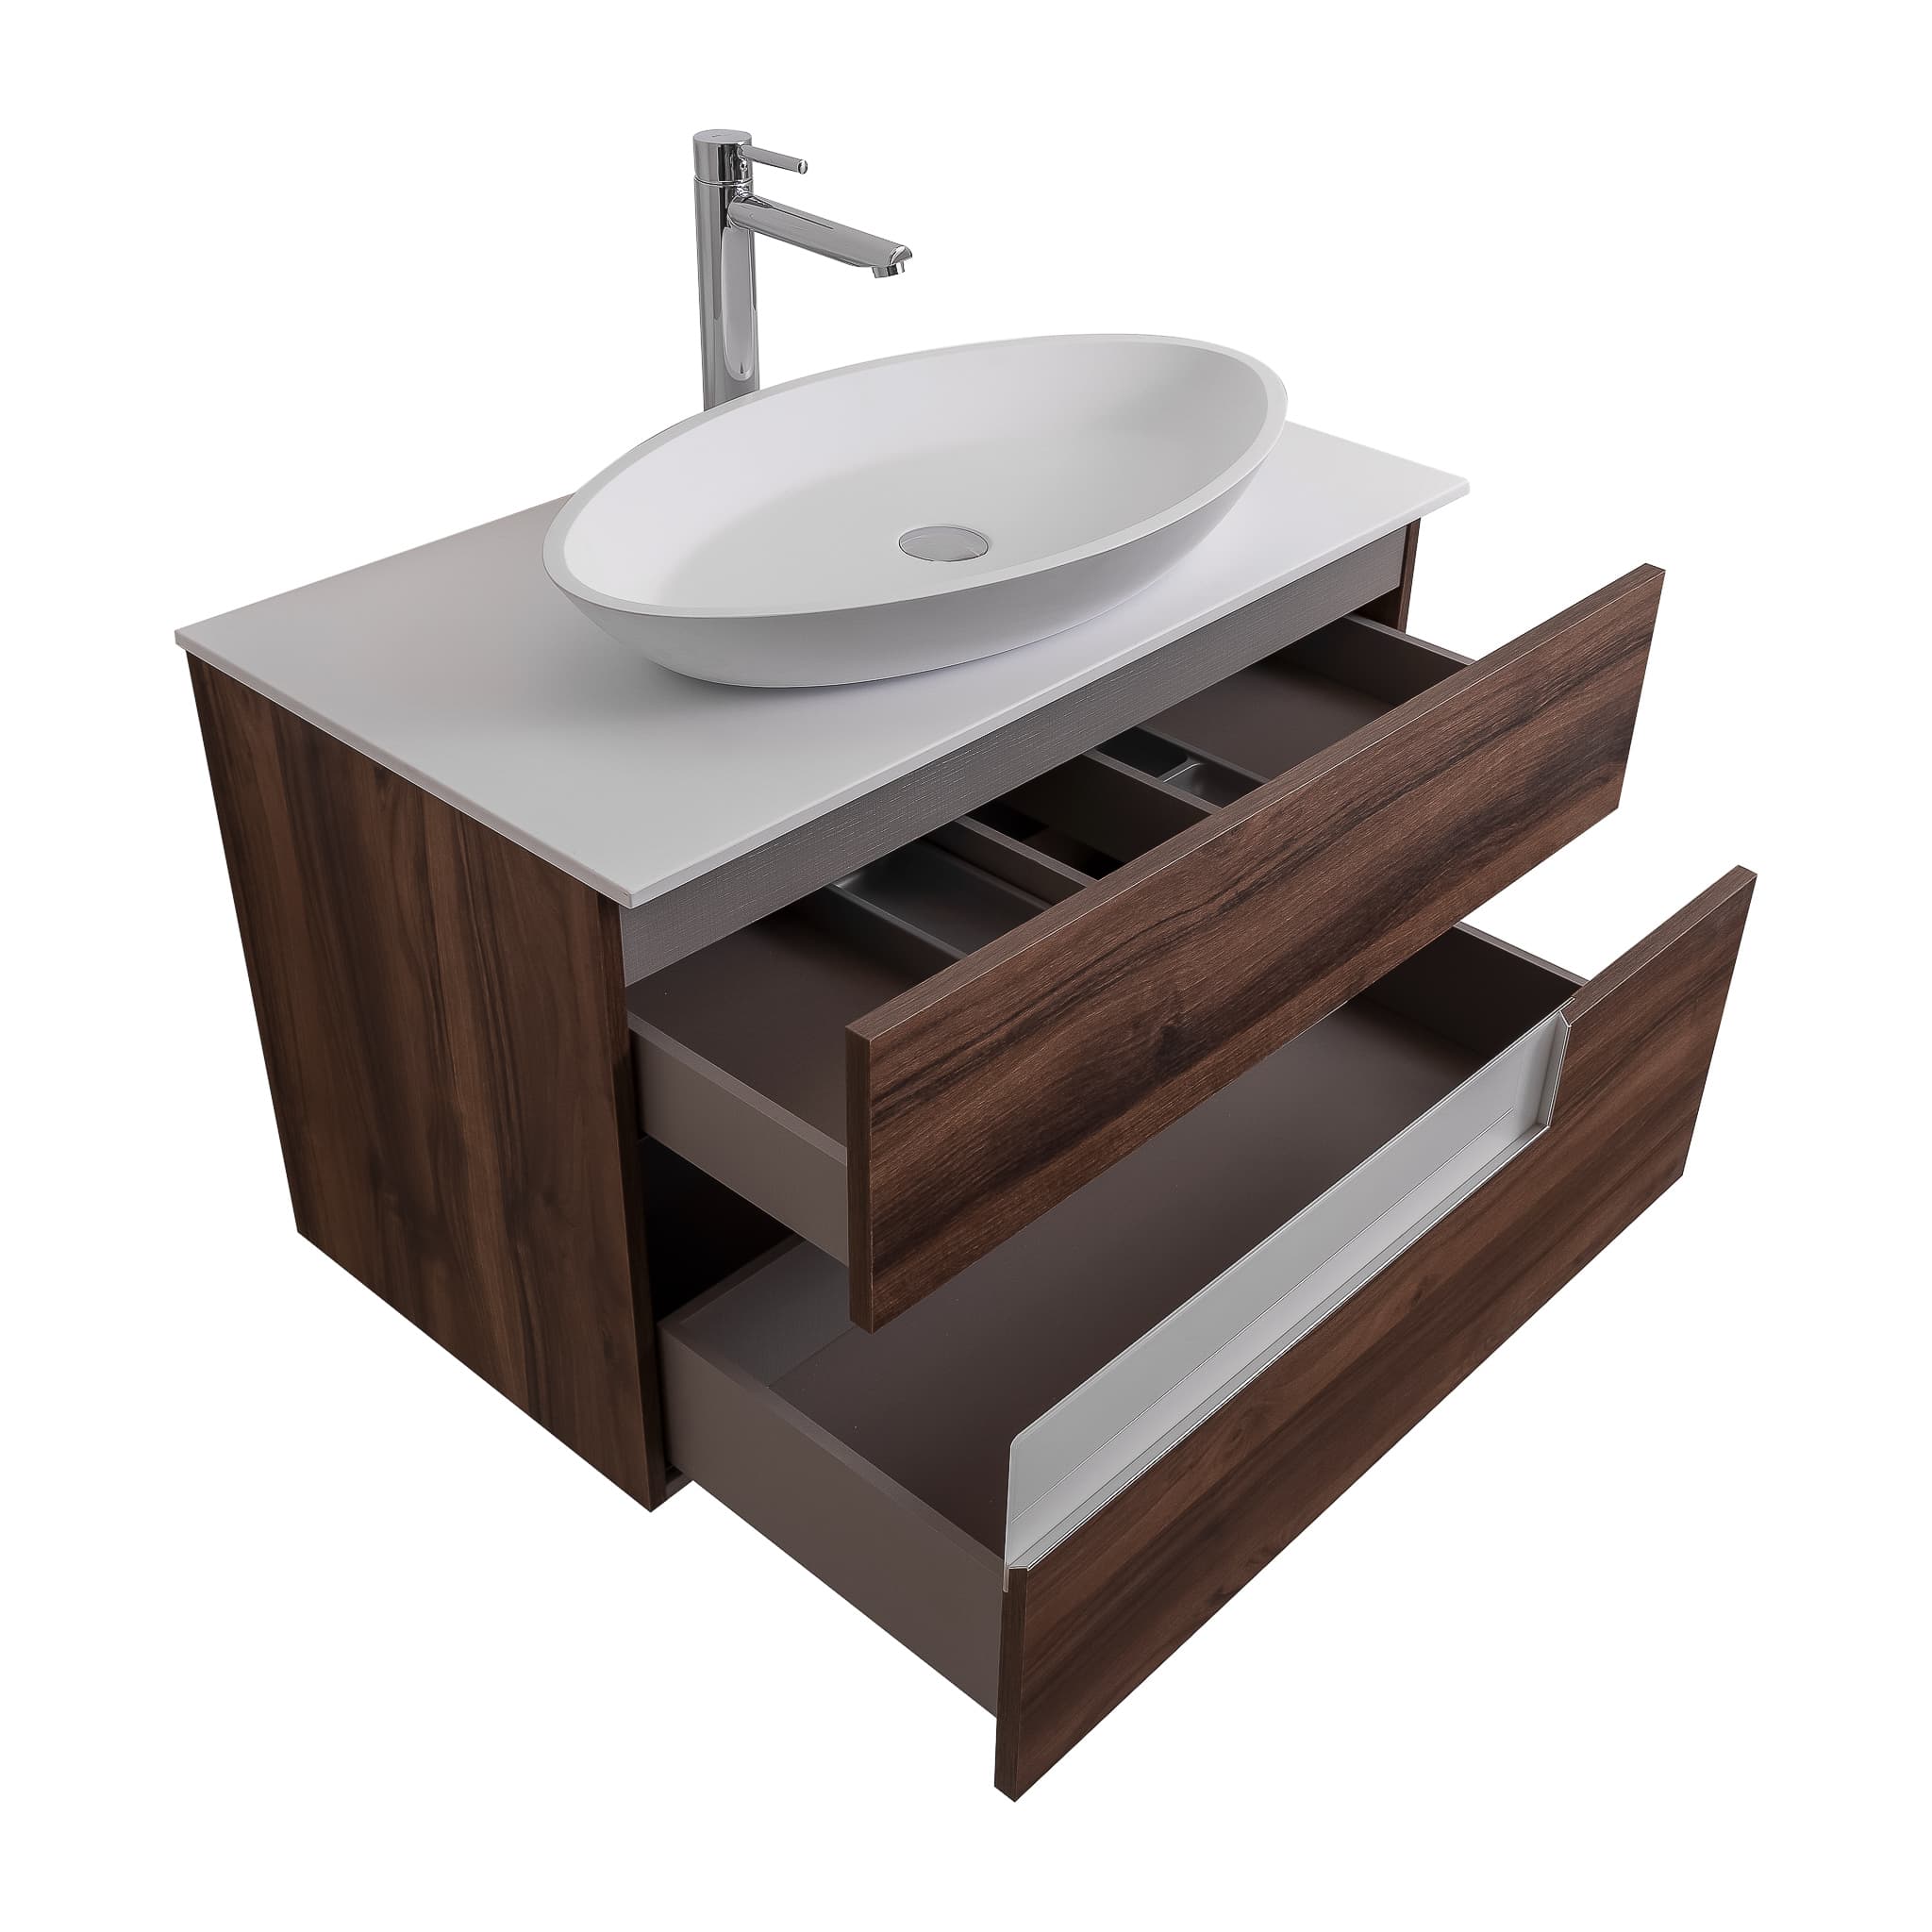 Vision 35.5 Valenti Medium Brown Wood Cabinet, Solid Surface Flat White Counter And Oval Solid Surface White Basin 1305, Wall Mounted Modern Vanity Set